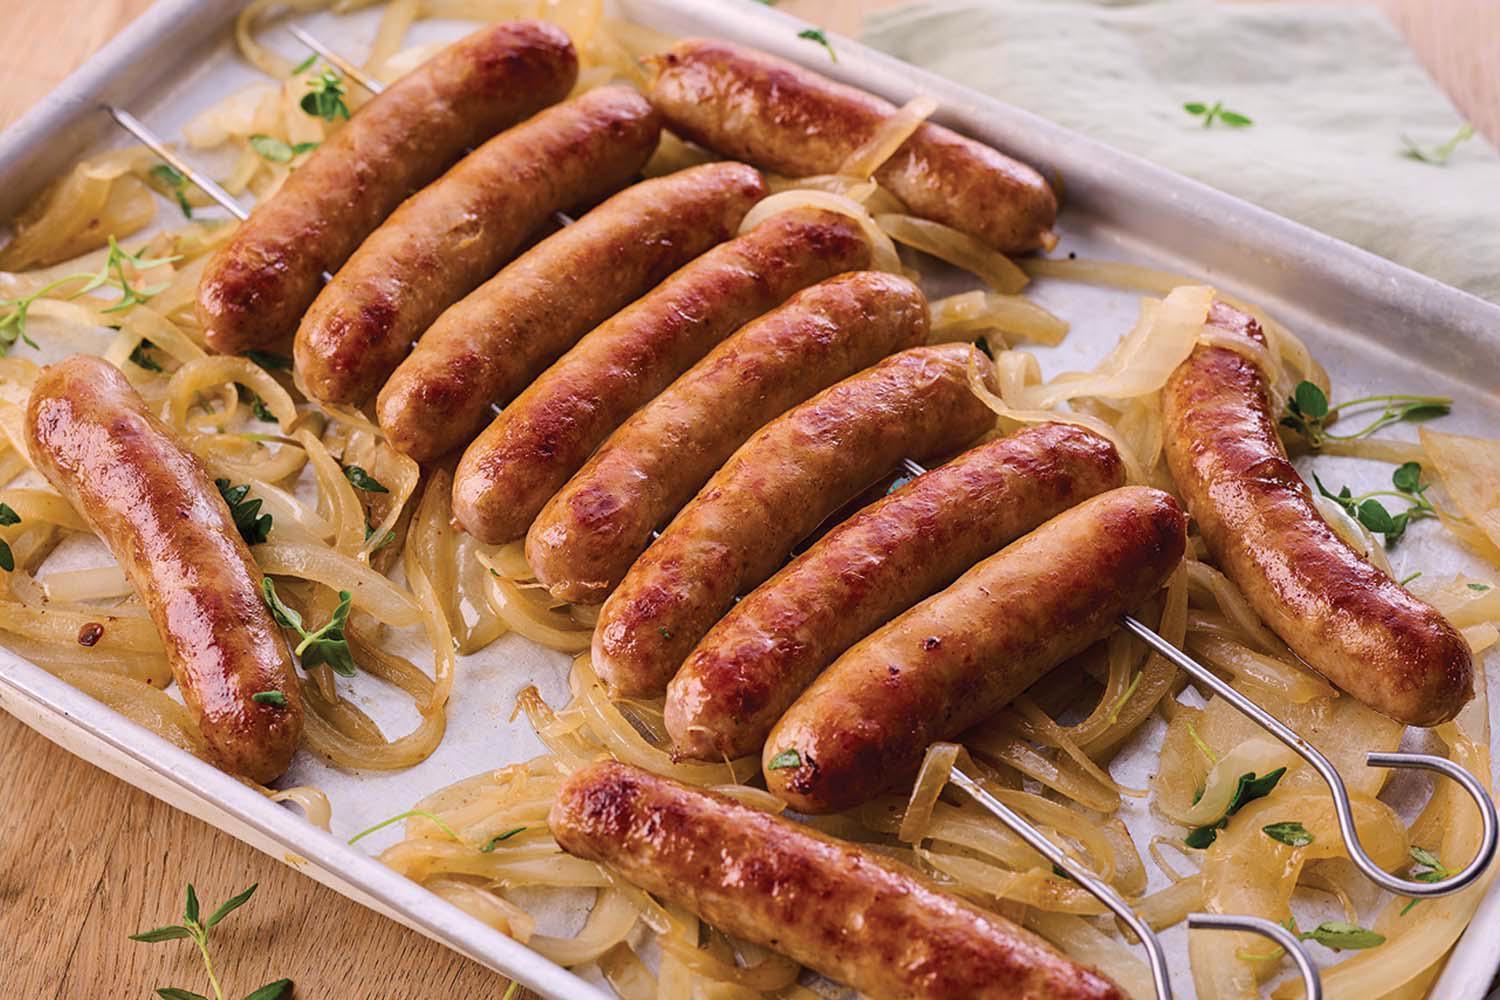 12x DukesHill Traditional Pork Chipolatas on an oven tray